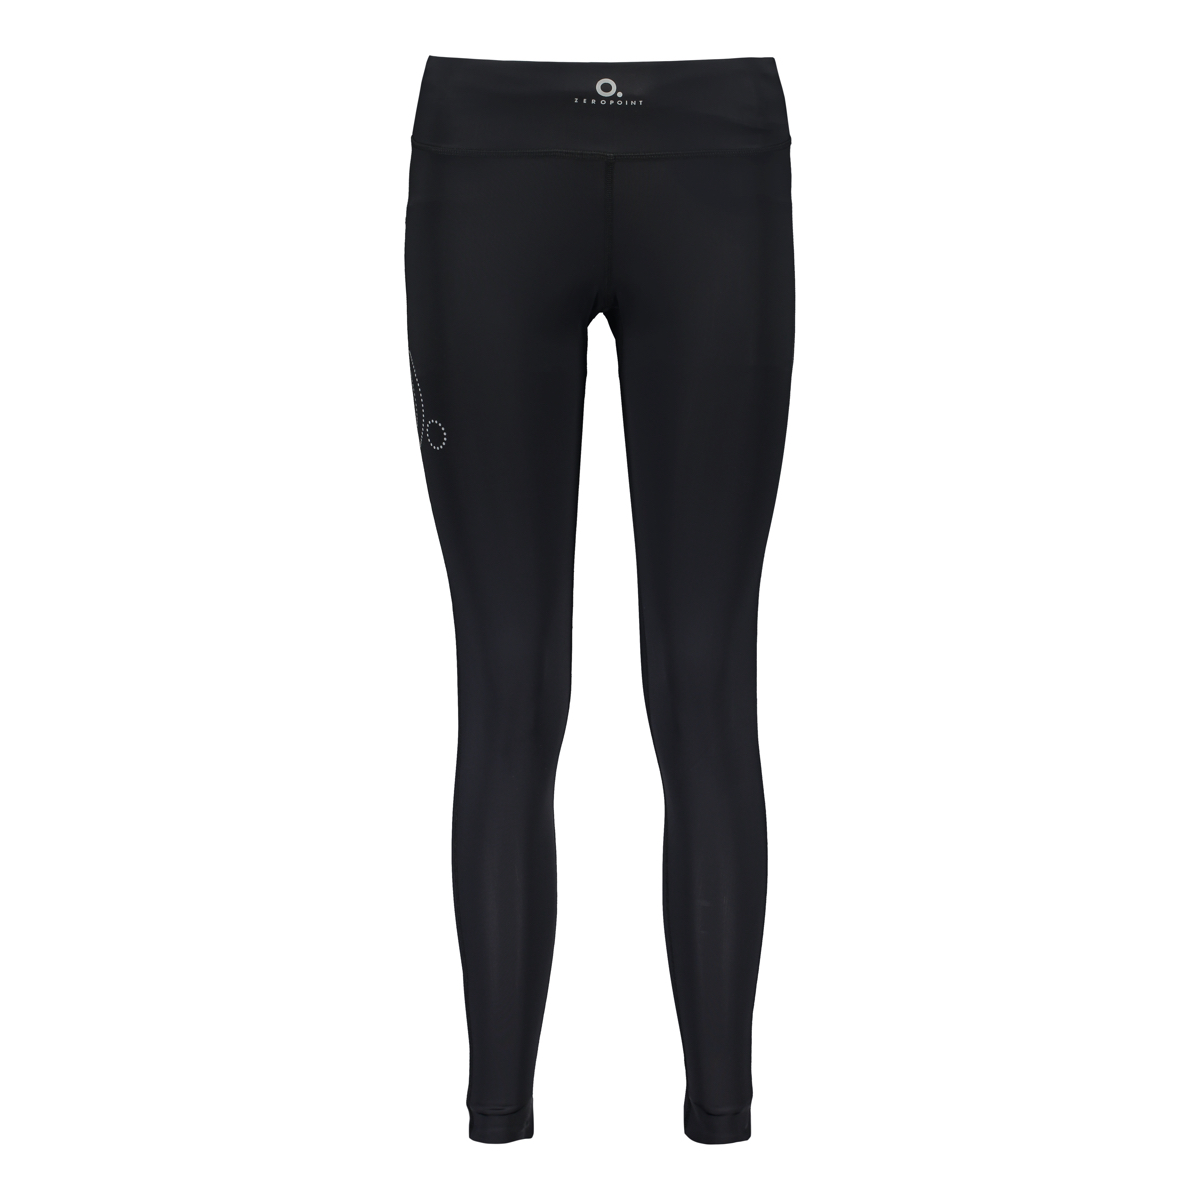 21 Women | Compression Athletic ZeroPoint Tights